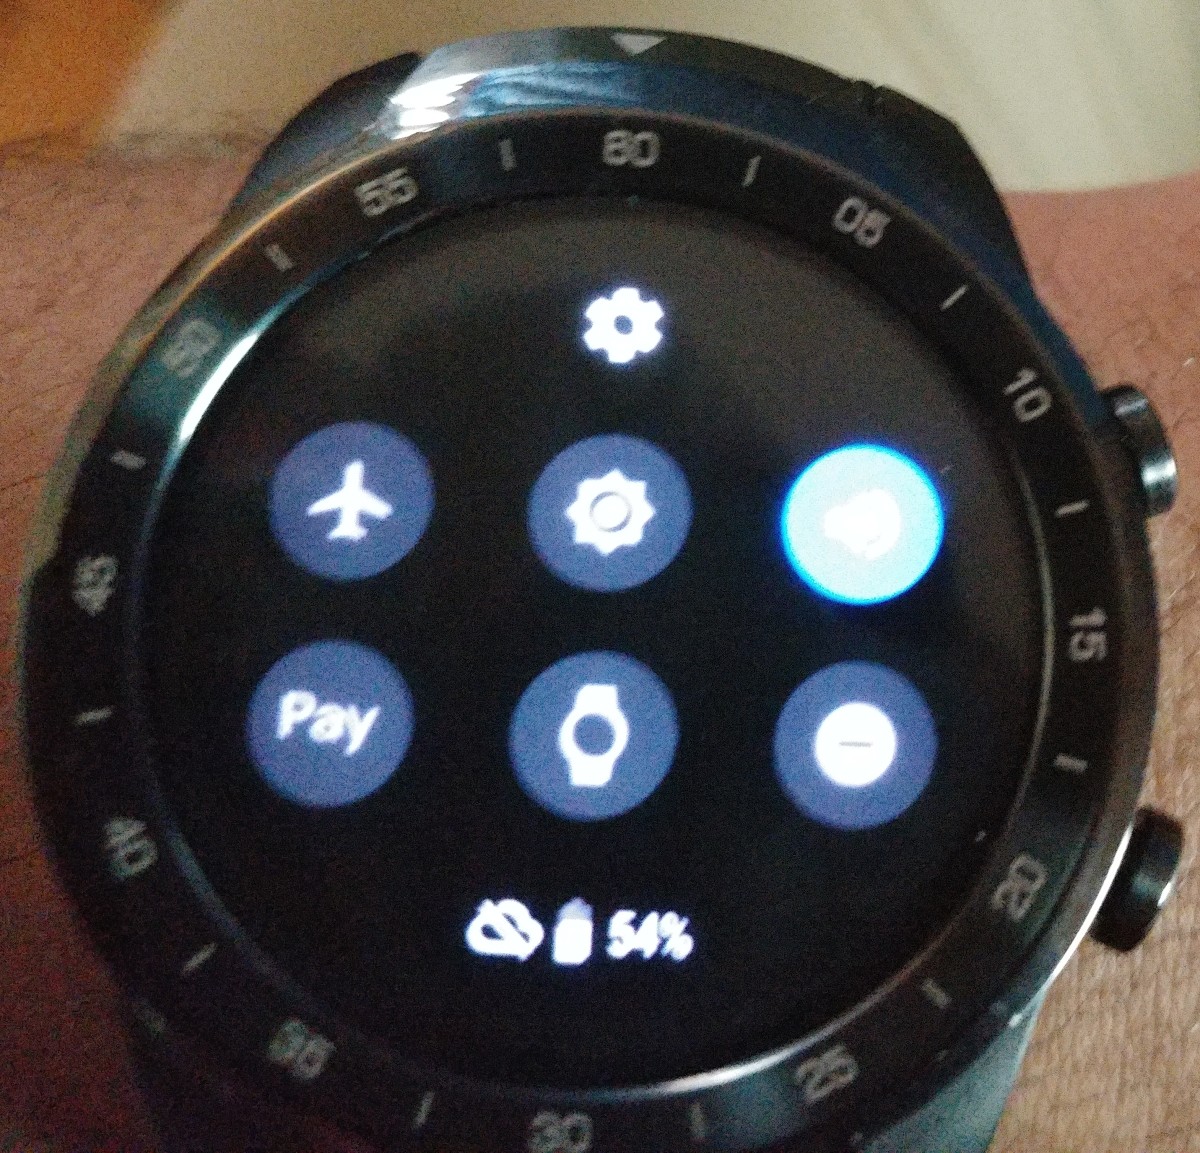 This is the TicWatch Pro quick settings screen. You can see the current battery life information here.